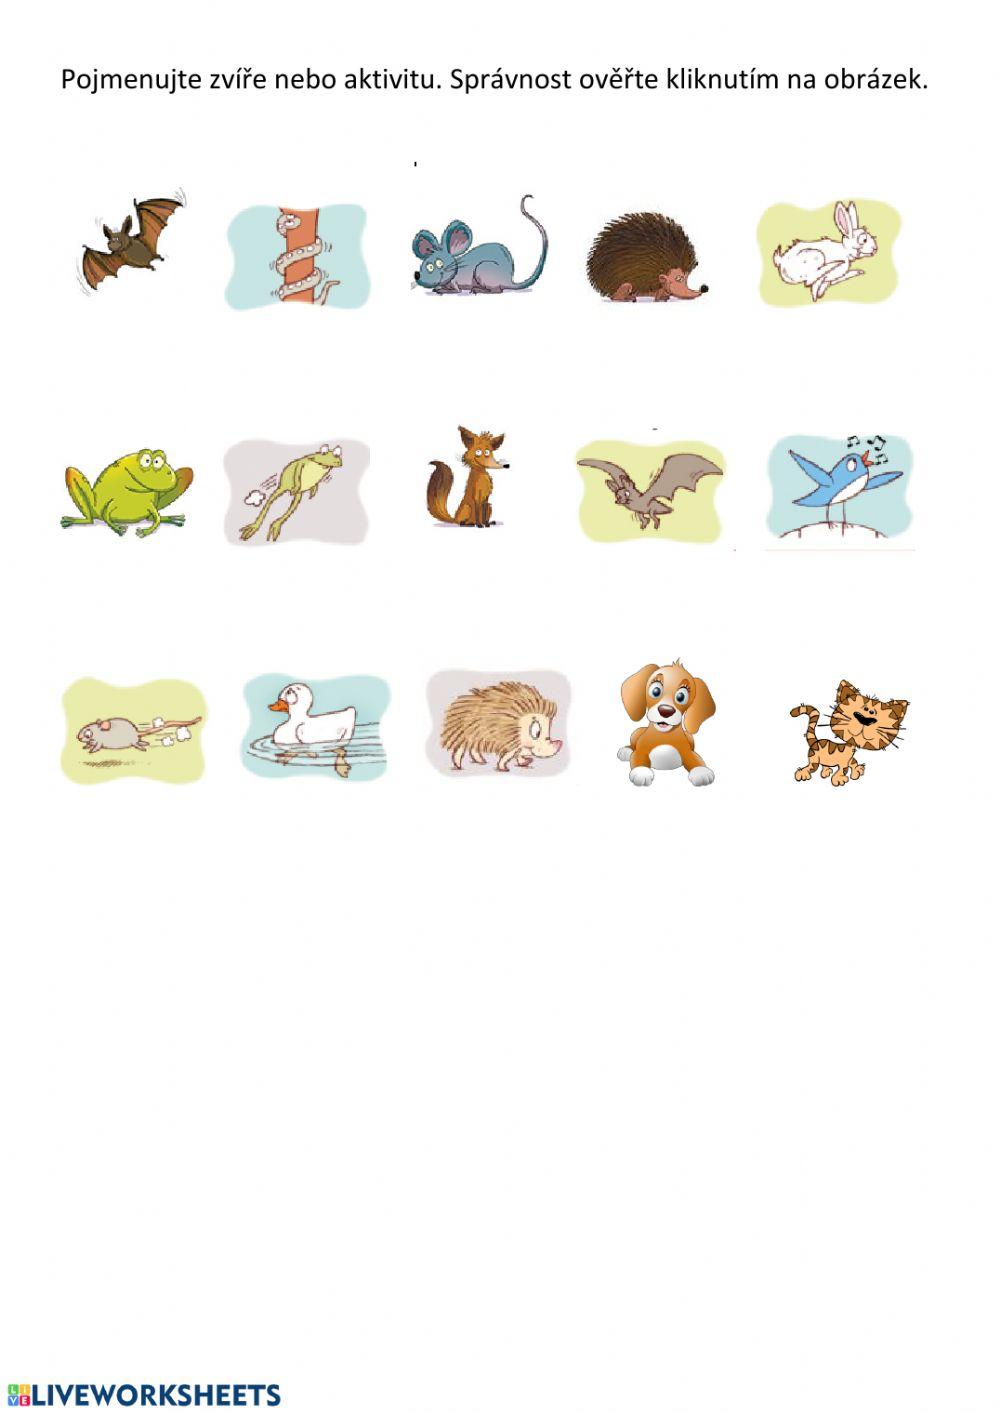 Animals and verbs